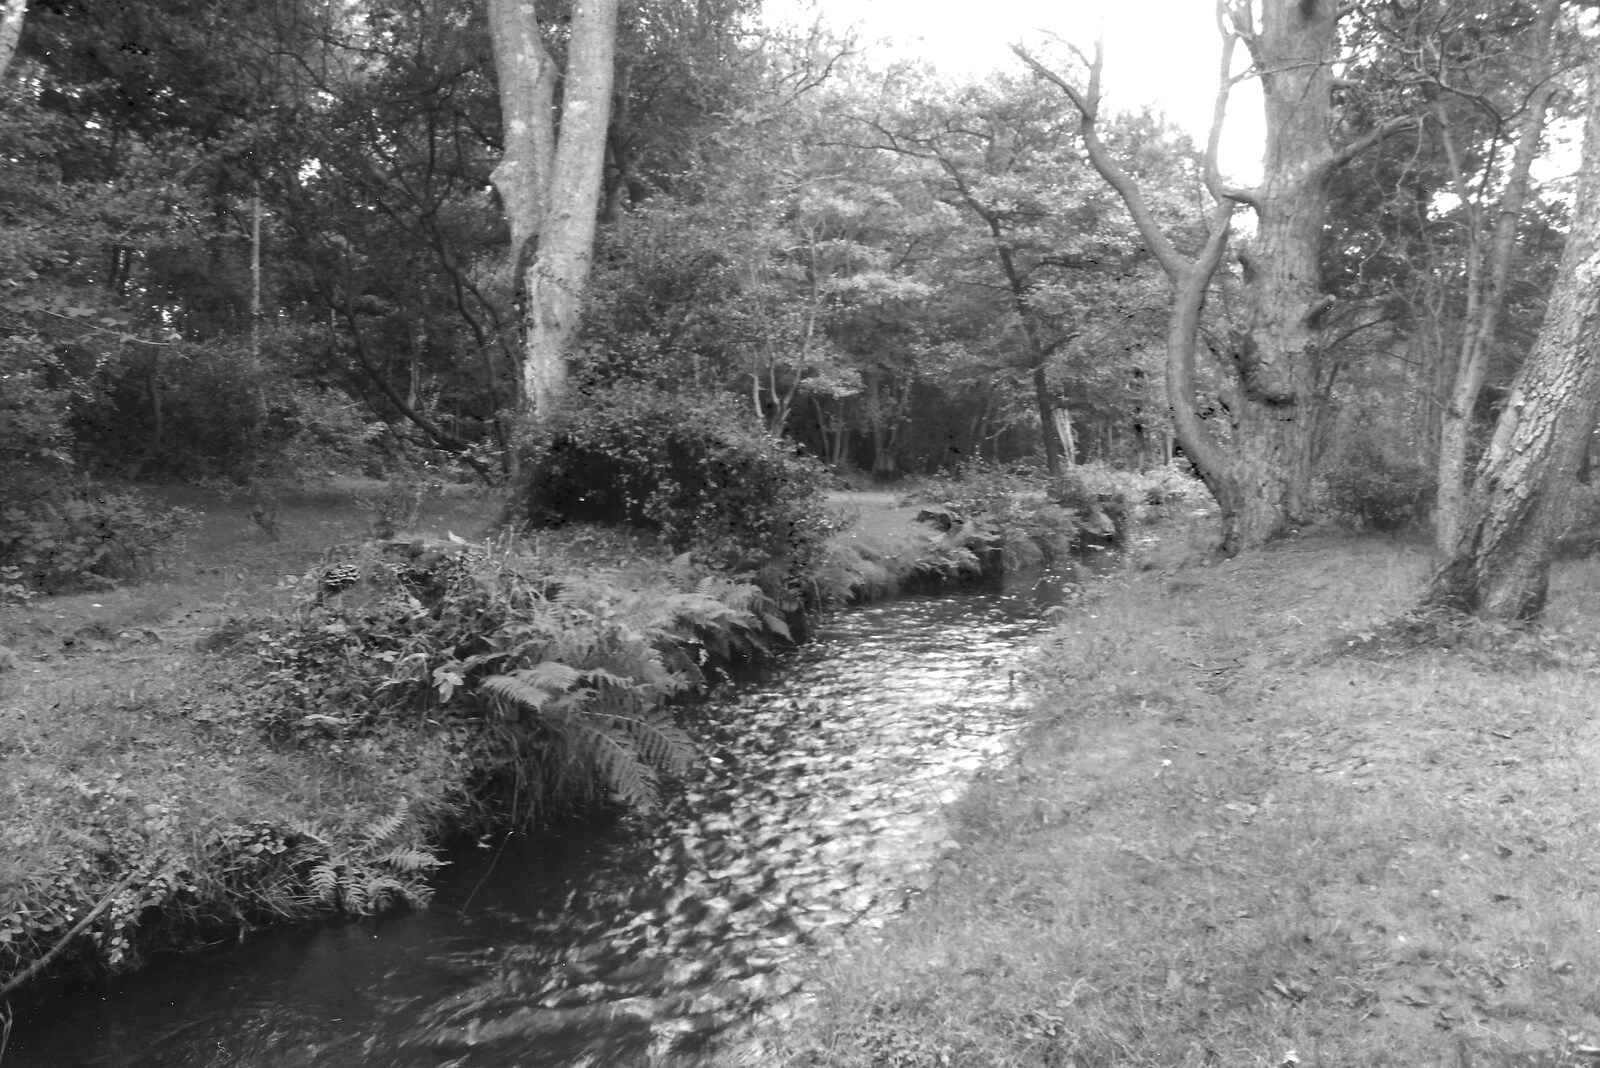 The river at Wootton Bridge in the New Forest from The New Forest Marathon and Other Randomness, New Milton, Hampshire - 15th September 1985